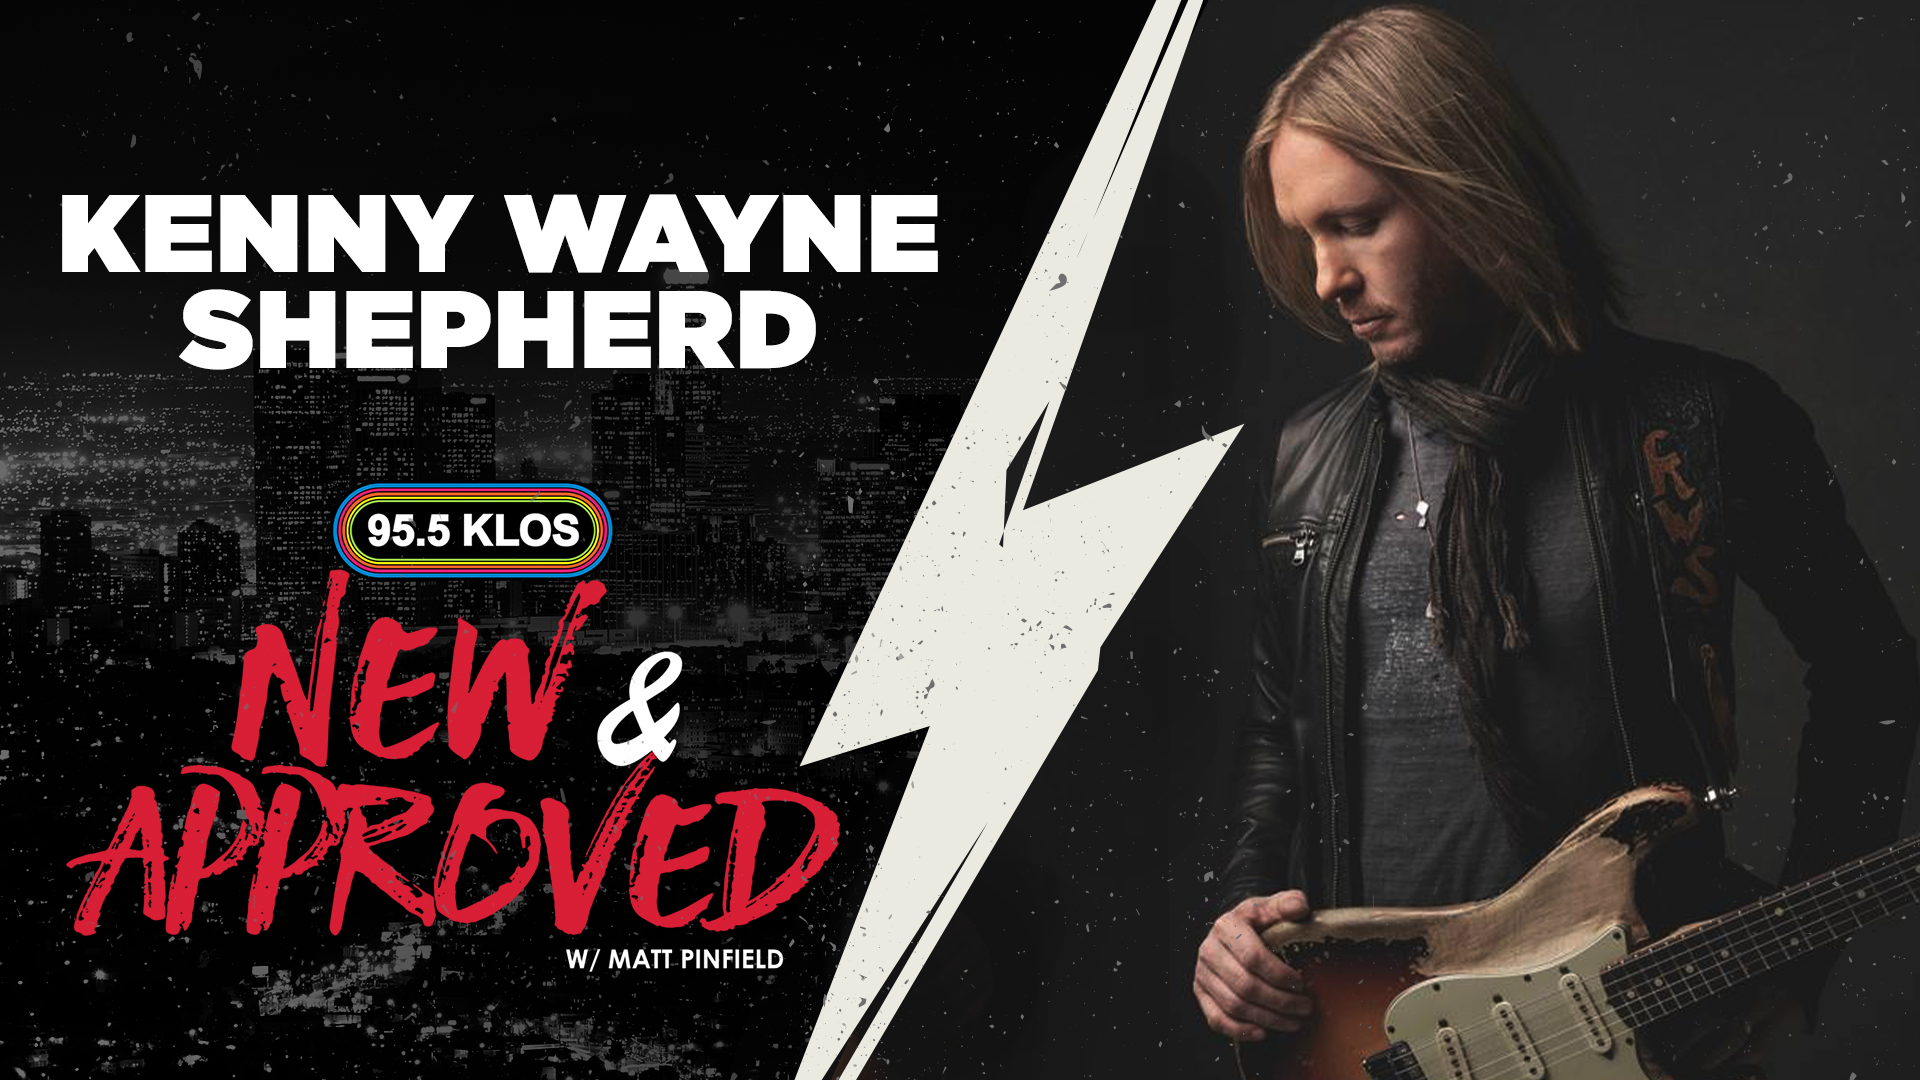 Kenny Wayne Shepherd Speaks With Matt Pinfield About 25th Anniversary of “Trouble Is”